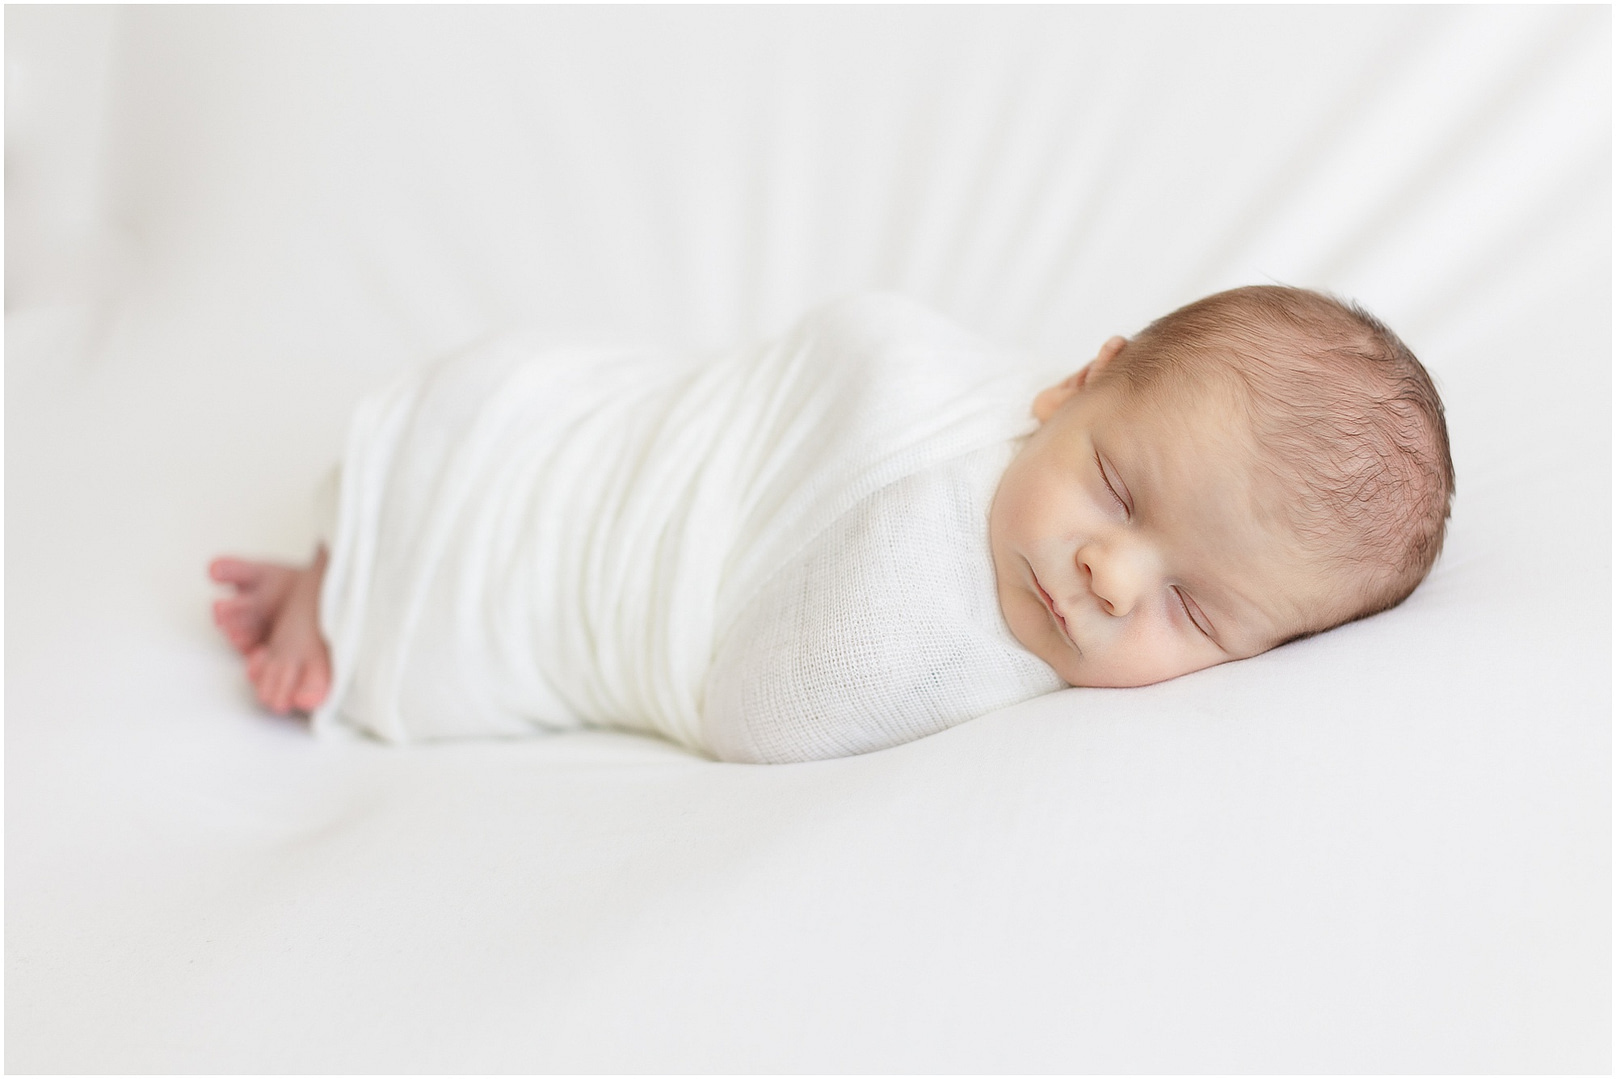 Newborn baby boy wrapped in white swaddle. Photo by Tiffany Hix Photography.